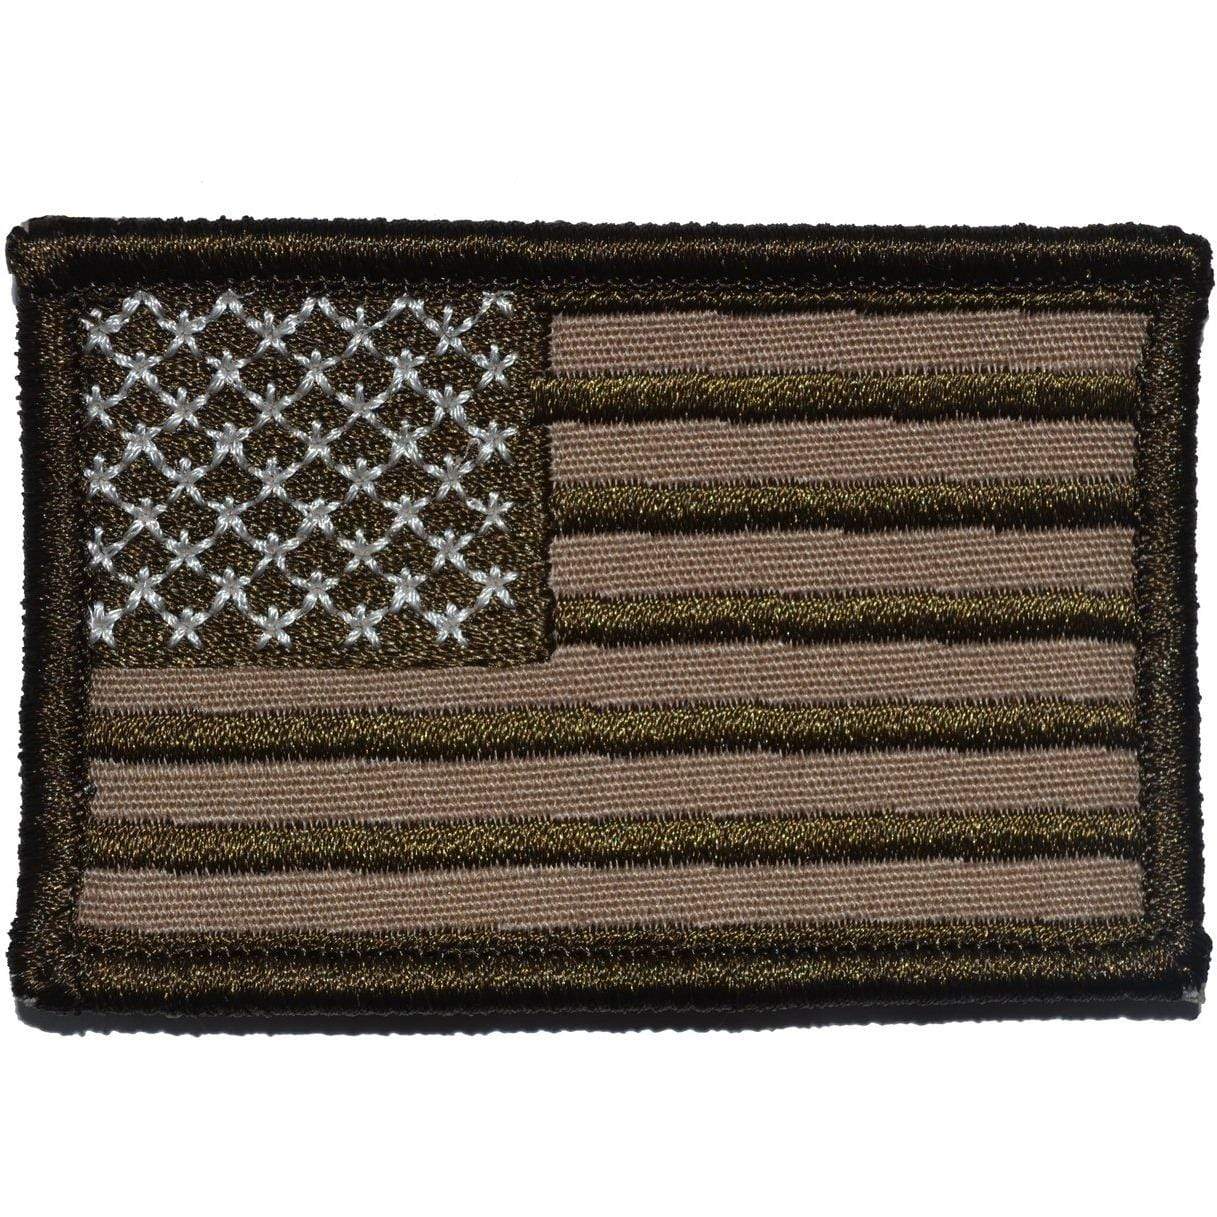 Hook & Loop Patch Wall / Patch Holder (Color: Coyote Brown /  Medium), Tactical Gear/Apparel, Patches